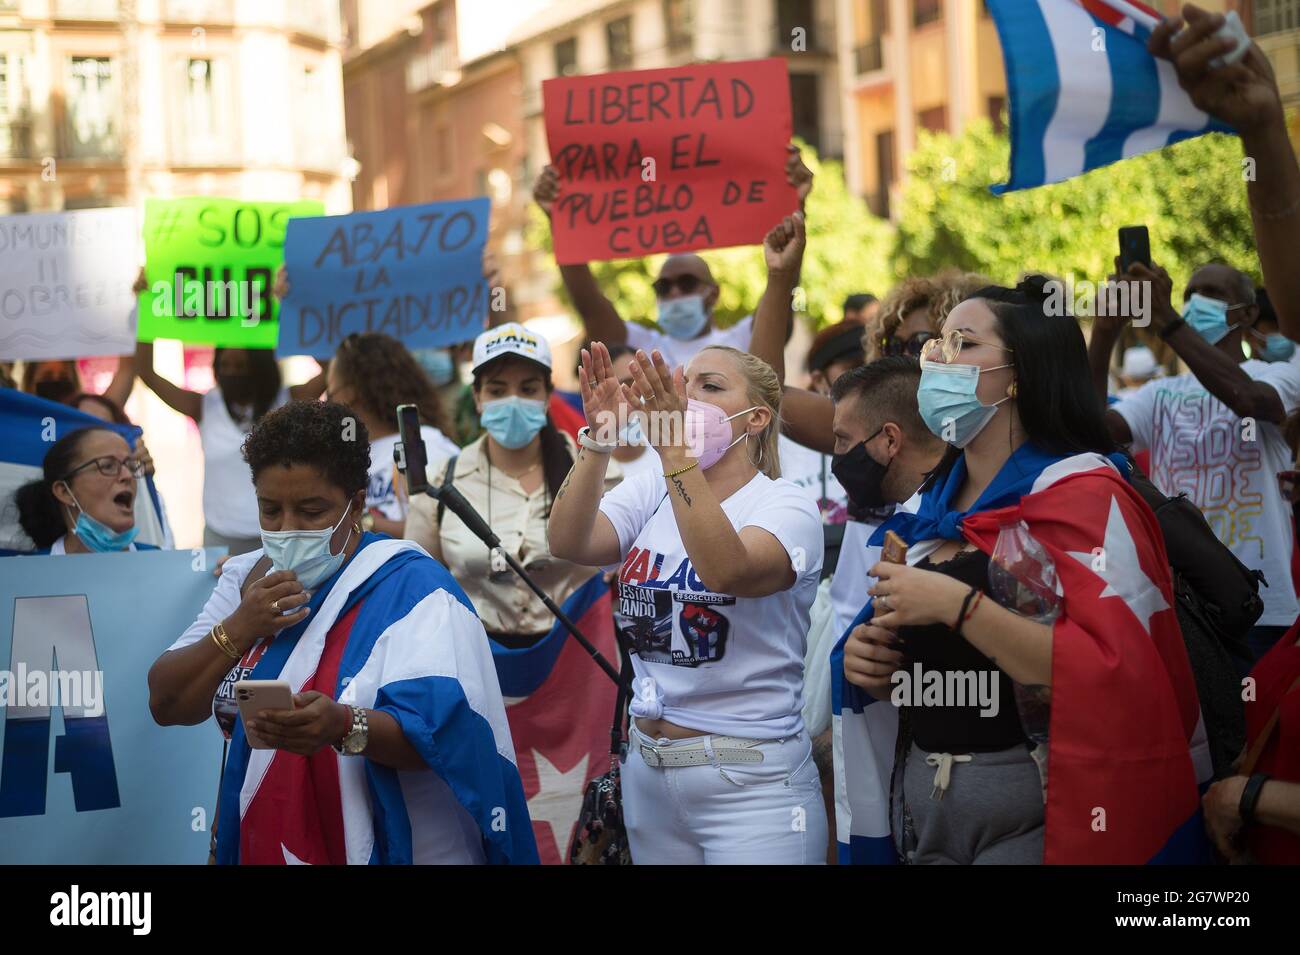 Malaga, Spain. 16th July, 2021. Protesters seen holding placards as they take part in a demonstration in support of Cuban population. A group of Cuban residents in Malaga have marched along main streets in downtown under the slogan: 'Homeland and life' to demonstrate against government of Cuban president Miguel Diaz Canel, after social breakdown in Cuba demanding the end of the communist dictatorship. Credit: SOPA Images Limited/Alamy Live News Stock Photo